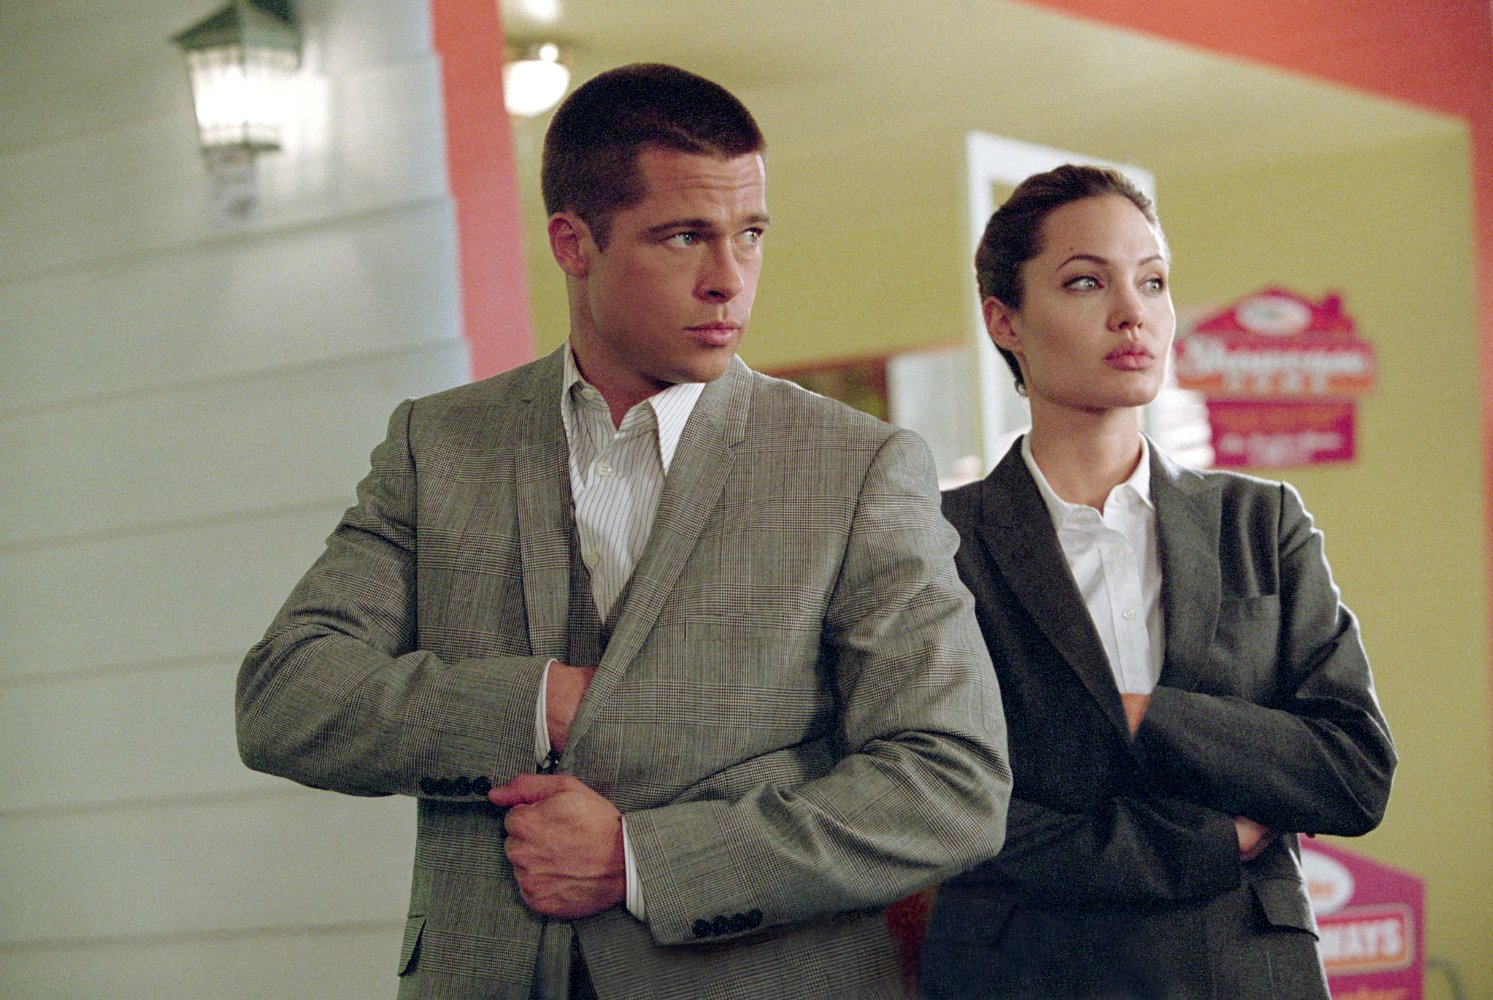 PHOTO: A scene from the movie "Mr. and Mrs. Smith," is seen here.